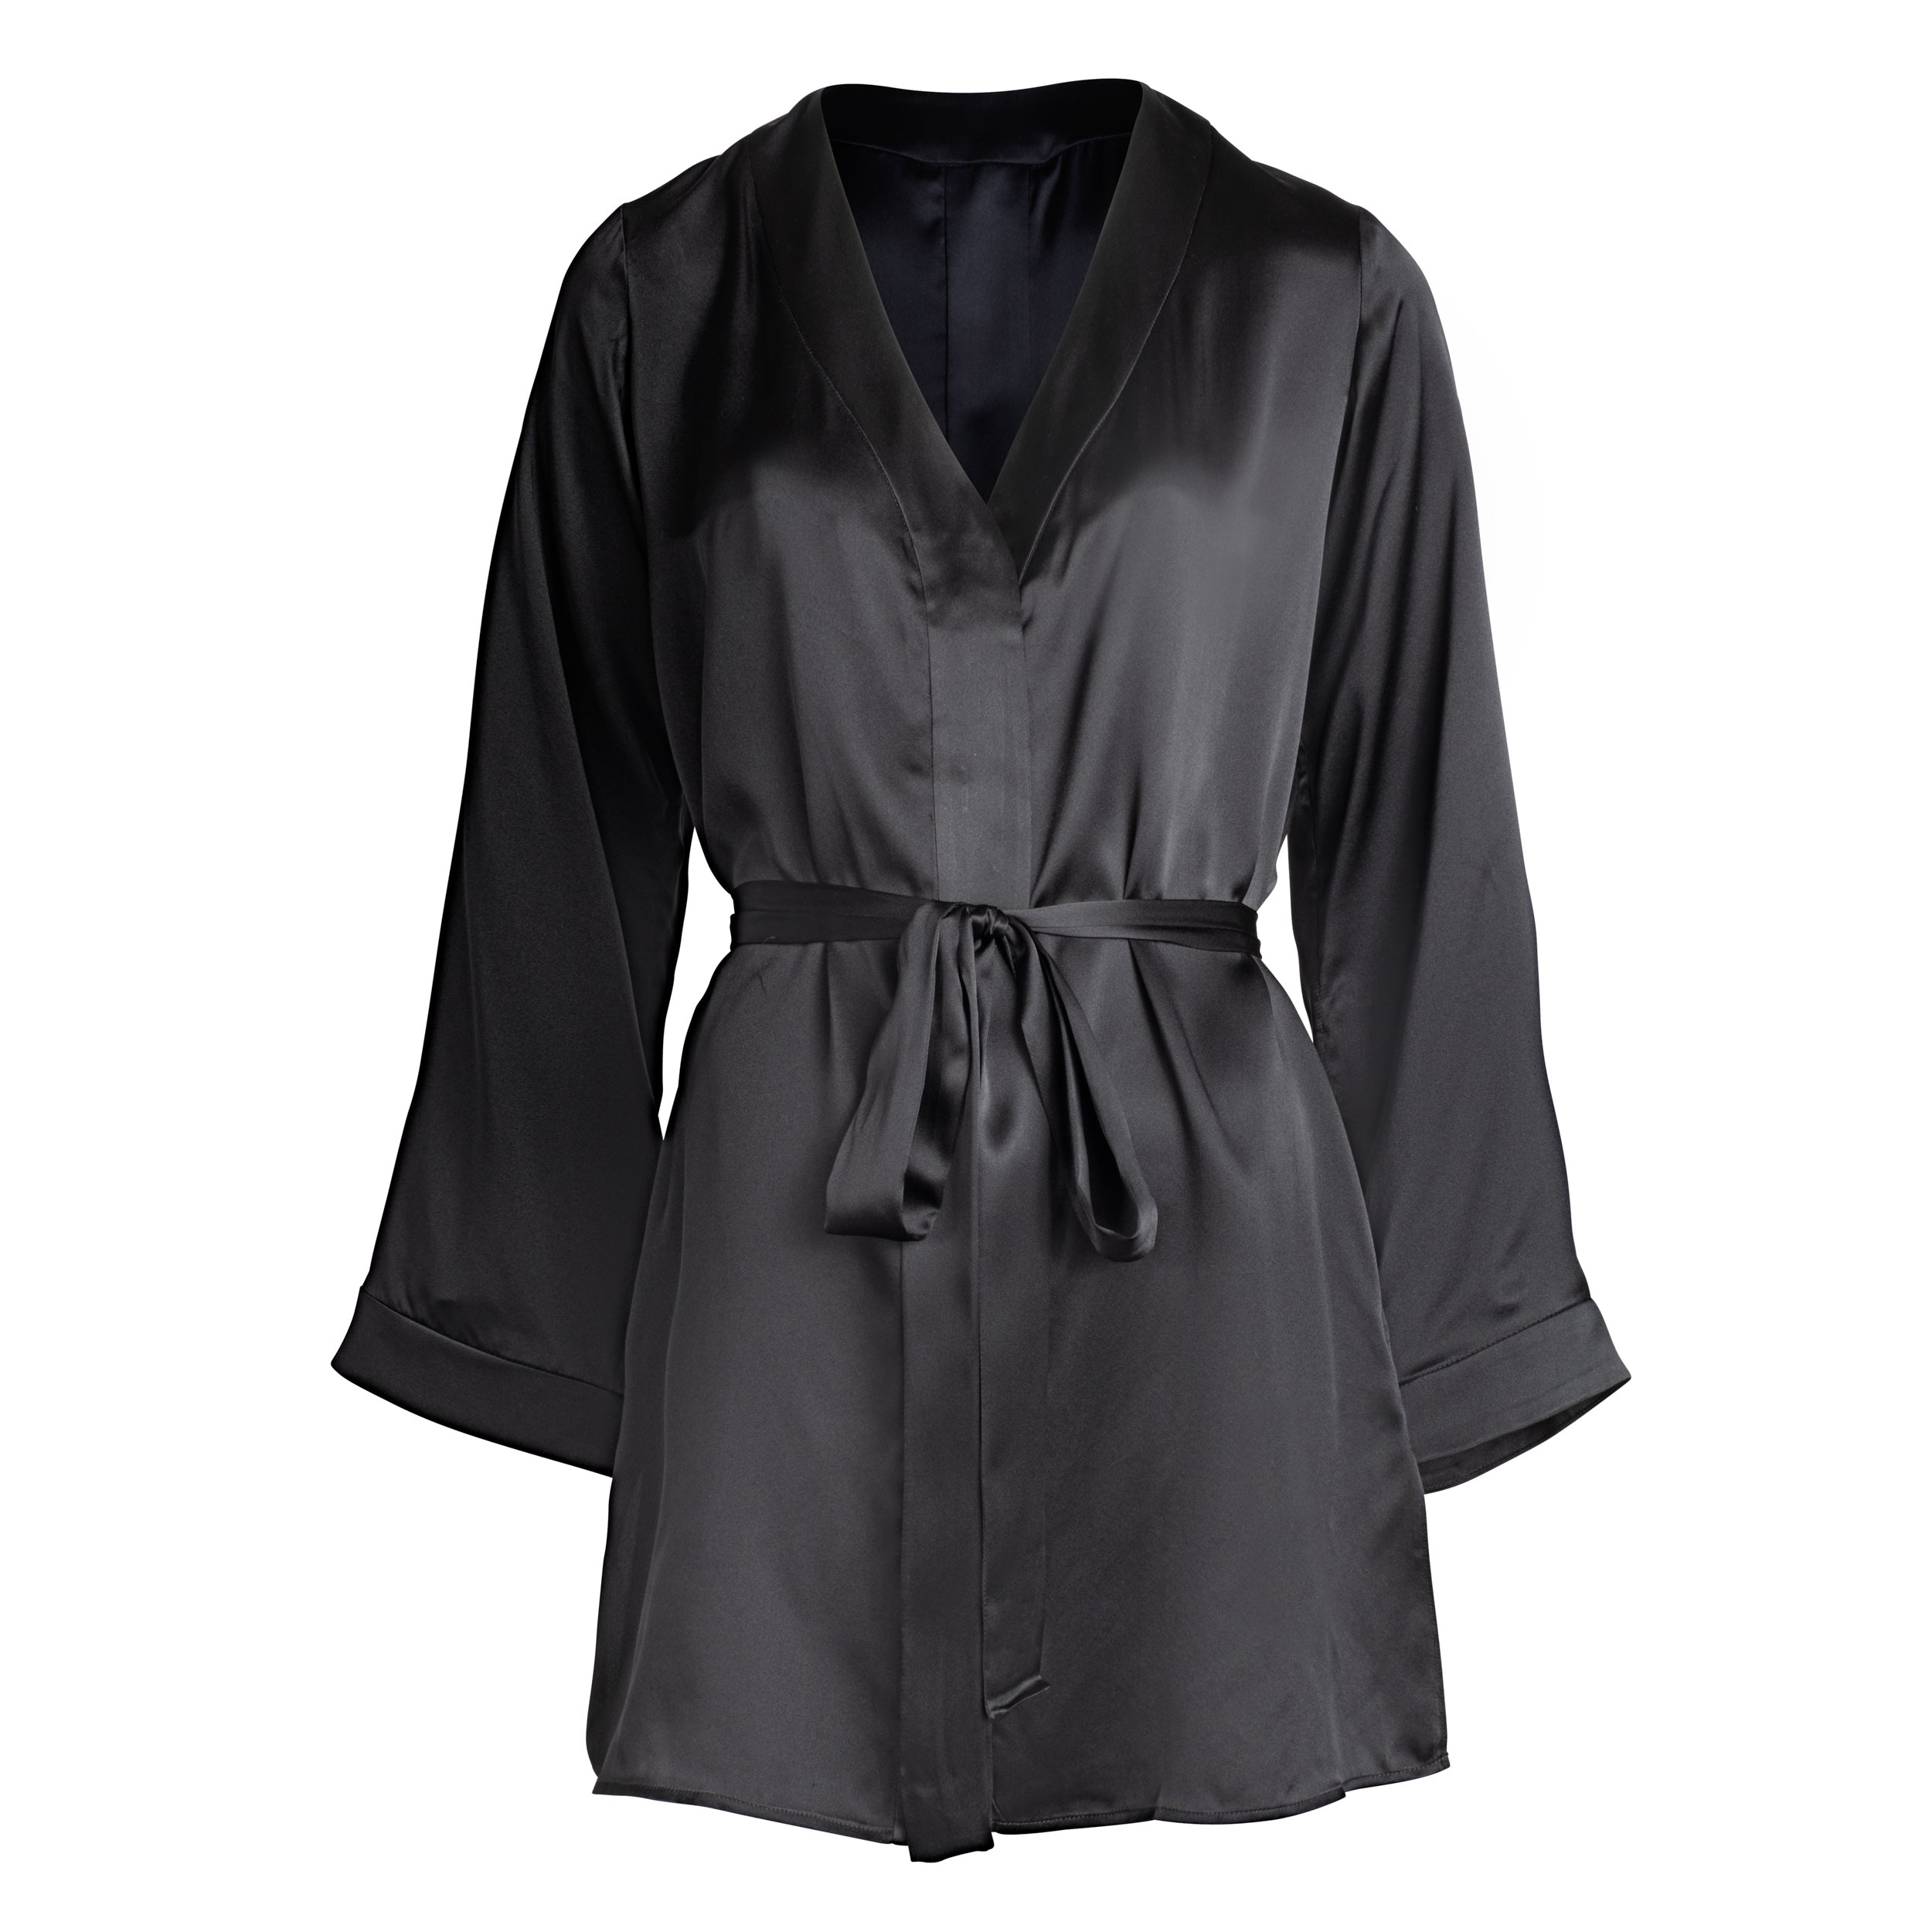 made in the softest washed silk charmeuse, this hidden button front shirt dress can be worn as a robe, pajama top or shirtdress, in and outside of the boudoir  belt loop is subtly and discretely hidden behind the back placket  complete with resting pockets  wear with a je mérite coordinating bottom or chemise  soft collar v-neck neckline subtle slits at sides removable belt sensual fit mini length  washed 100% silk charmeuse  designed in new york city, new york made in new york city, new york 